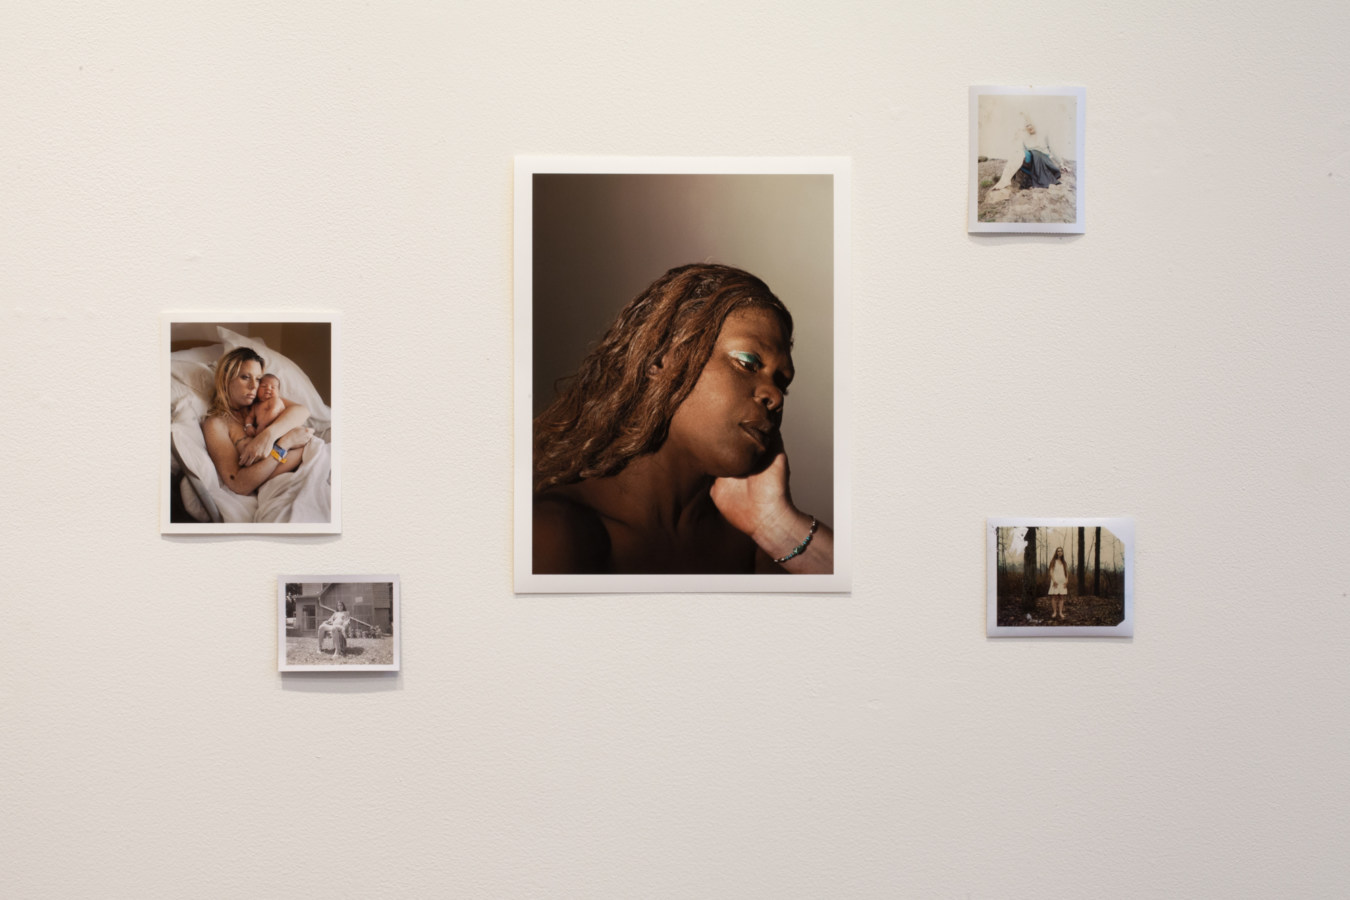 Installation photograph of a gallery space with small unframed prints on white wall